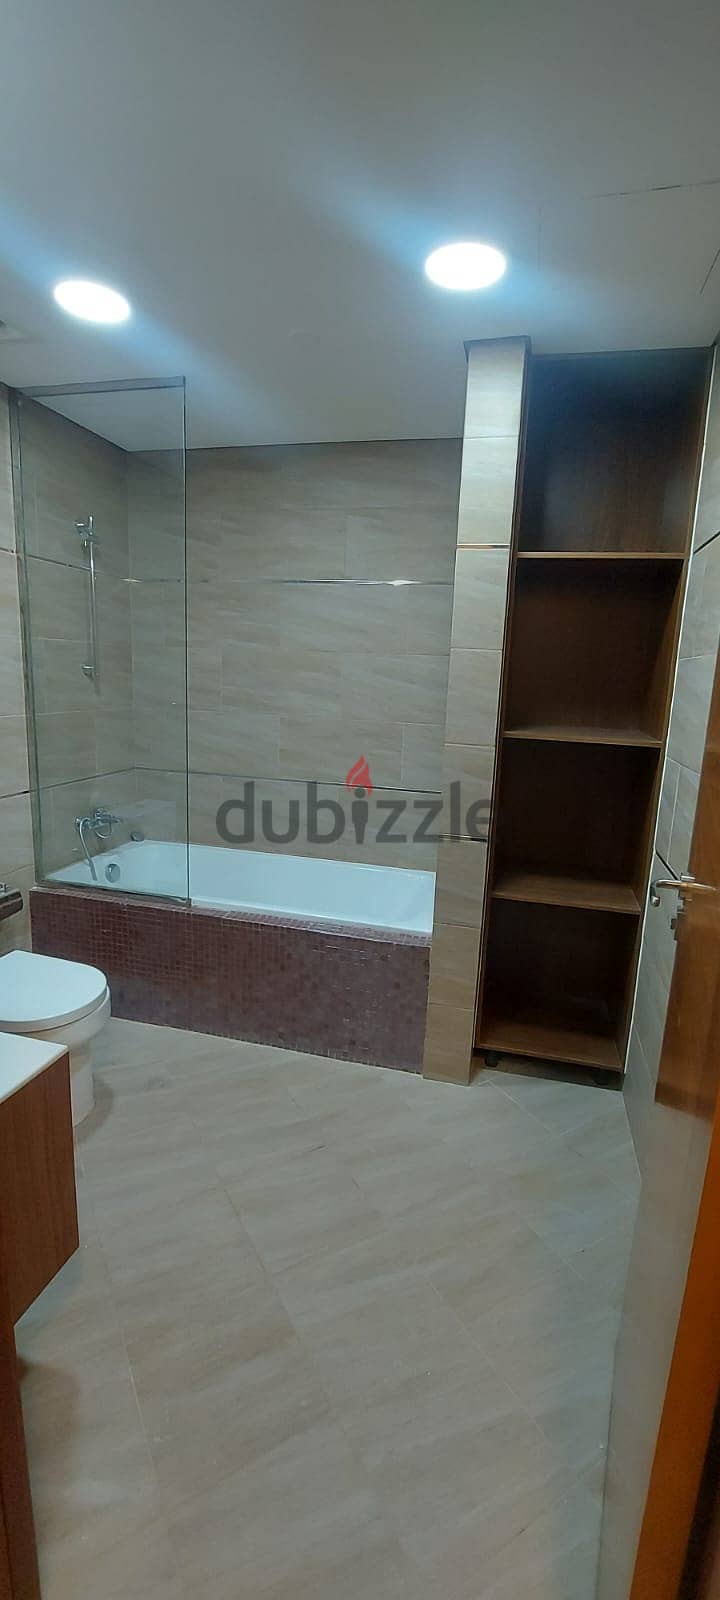 For sale apartment 2BHK in Erkyah City, Lusail City 7